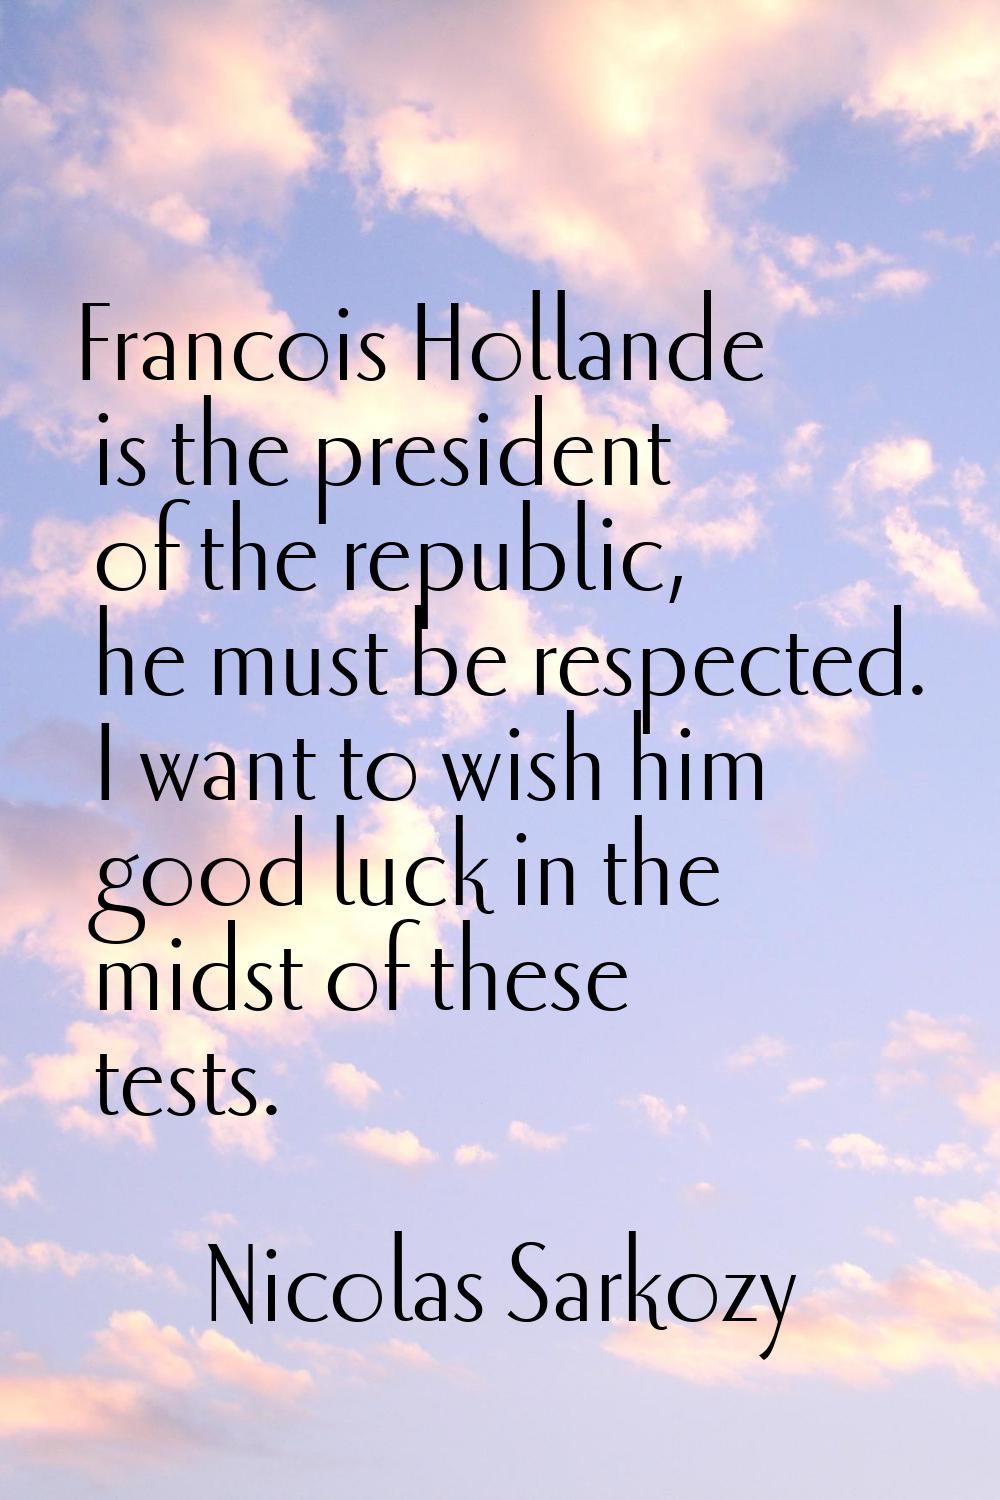 Francois Hollande is the president of the republic, he must be respected. I want to wish him good l